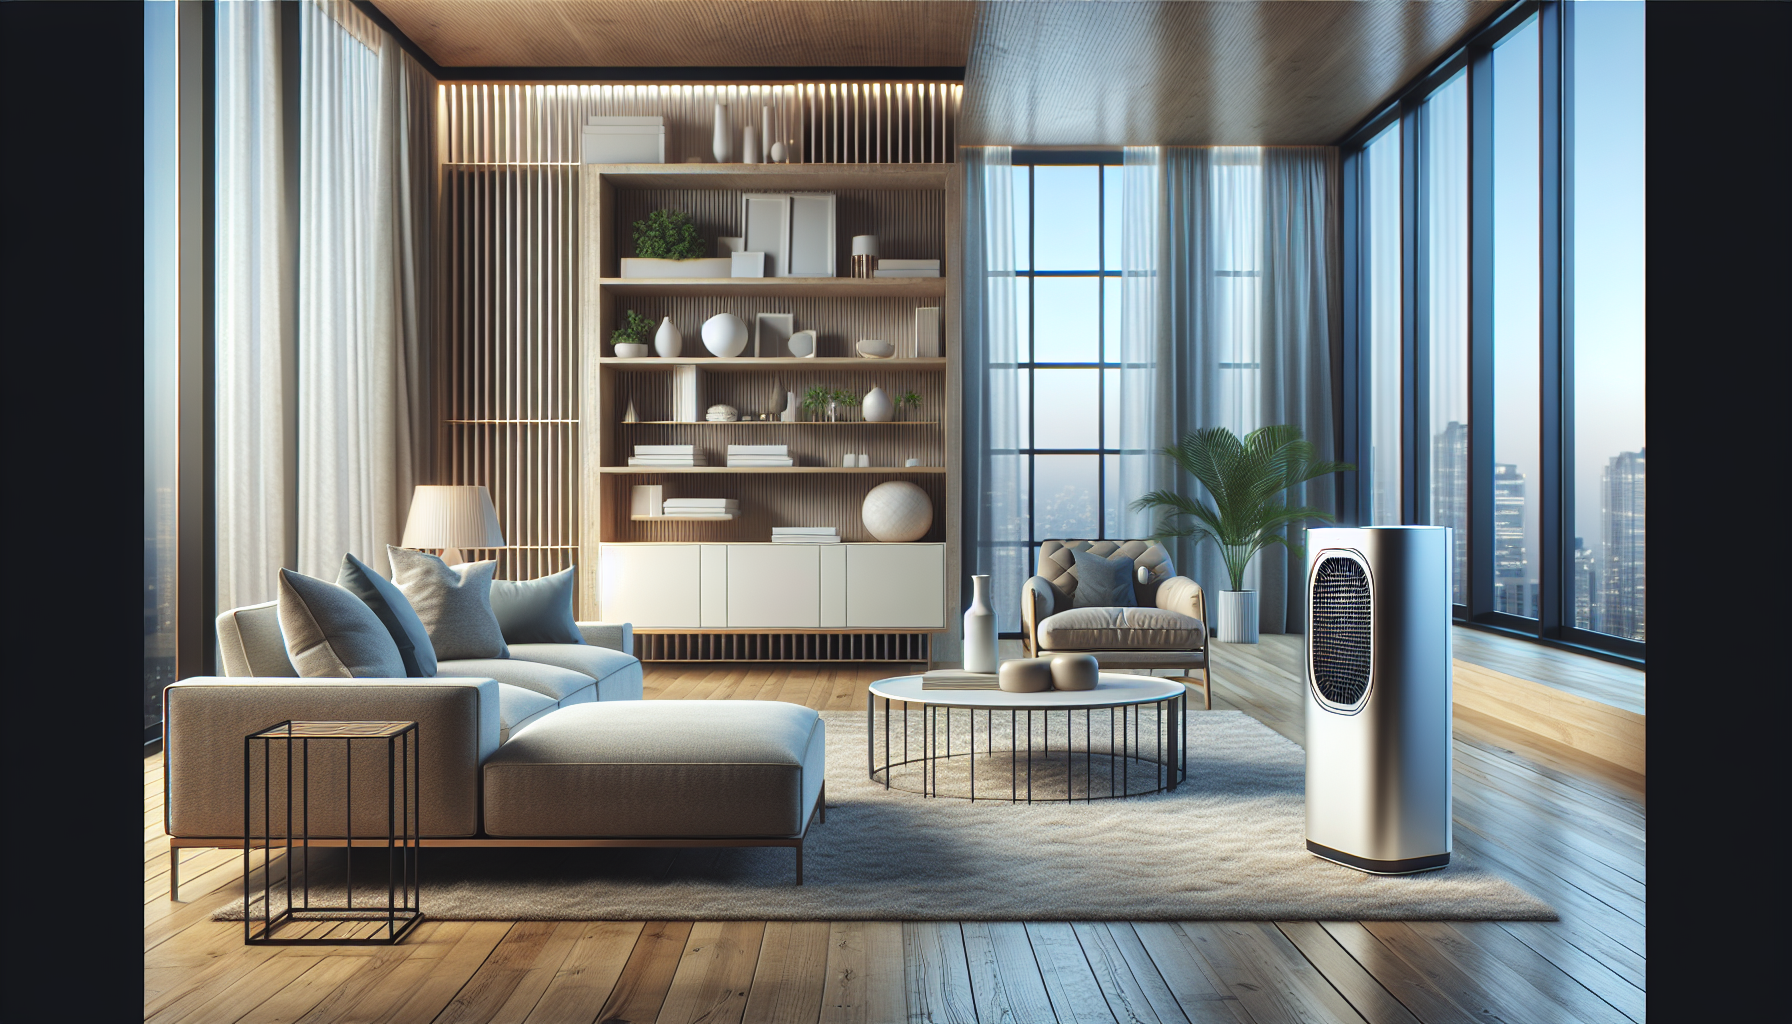 Should Air Purifier Be On Shelf Or Floor?